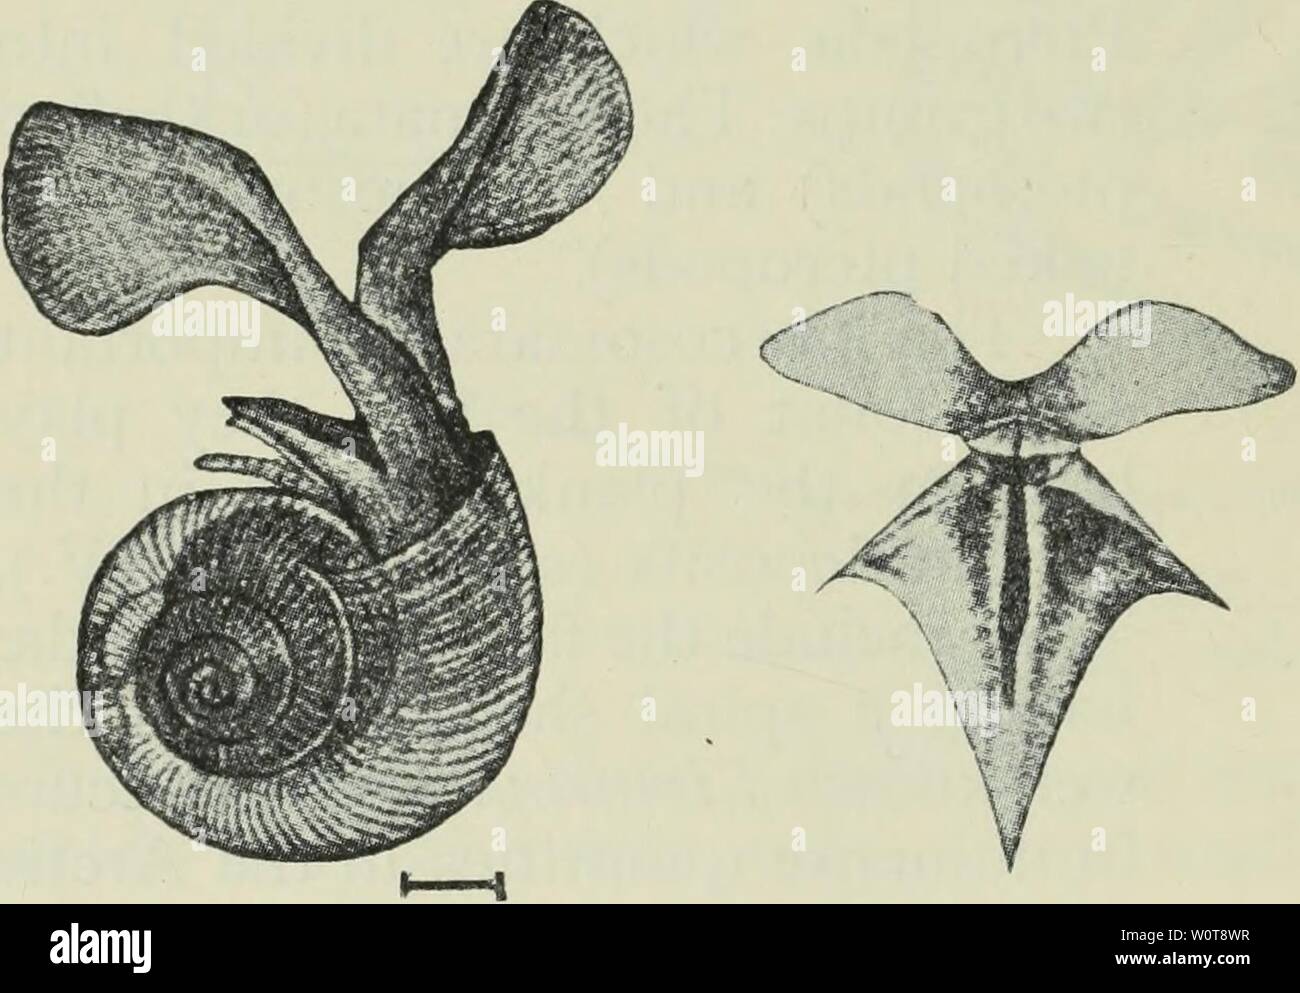 Archive image from page 625 of The depths of the ocean;. The depths of the ocean; a general account of the modern science of oceanography based largely on the scientific researches of the Norwegian steamer Michael Sars in the North Atlantic depthsofoceange00murr Year: 1912  Fig. 429. Limacina retroversa, Fleming. (From Sars.) Fig. 430. Clio pyramidata, L. (From Boas.) acicula (Fig. 431) and Cavolinia gibbosa (Fig. 432) are characteristic forms. The ' whale's food,' Clione limacina (Fig. 433), is specially abundant in north- ern waters, and is better known than most of the Gymnosomata. It is 3 Stock Photo